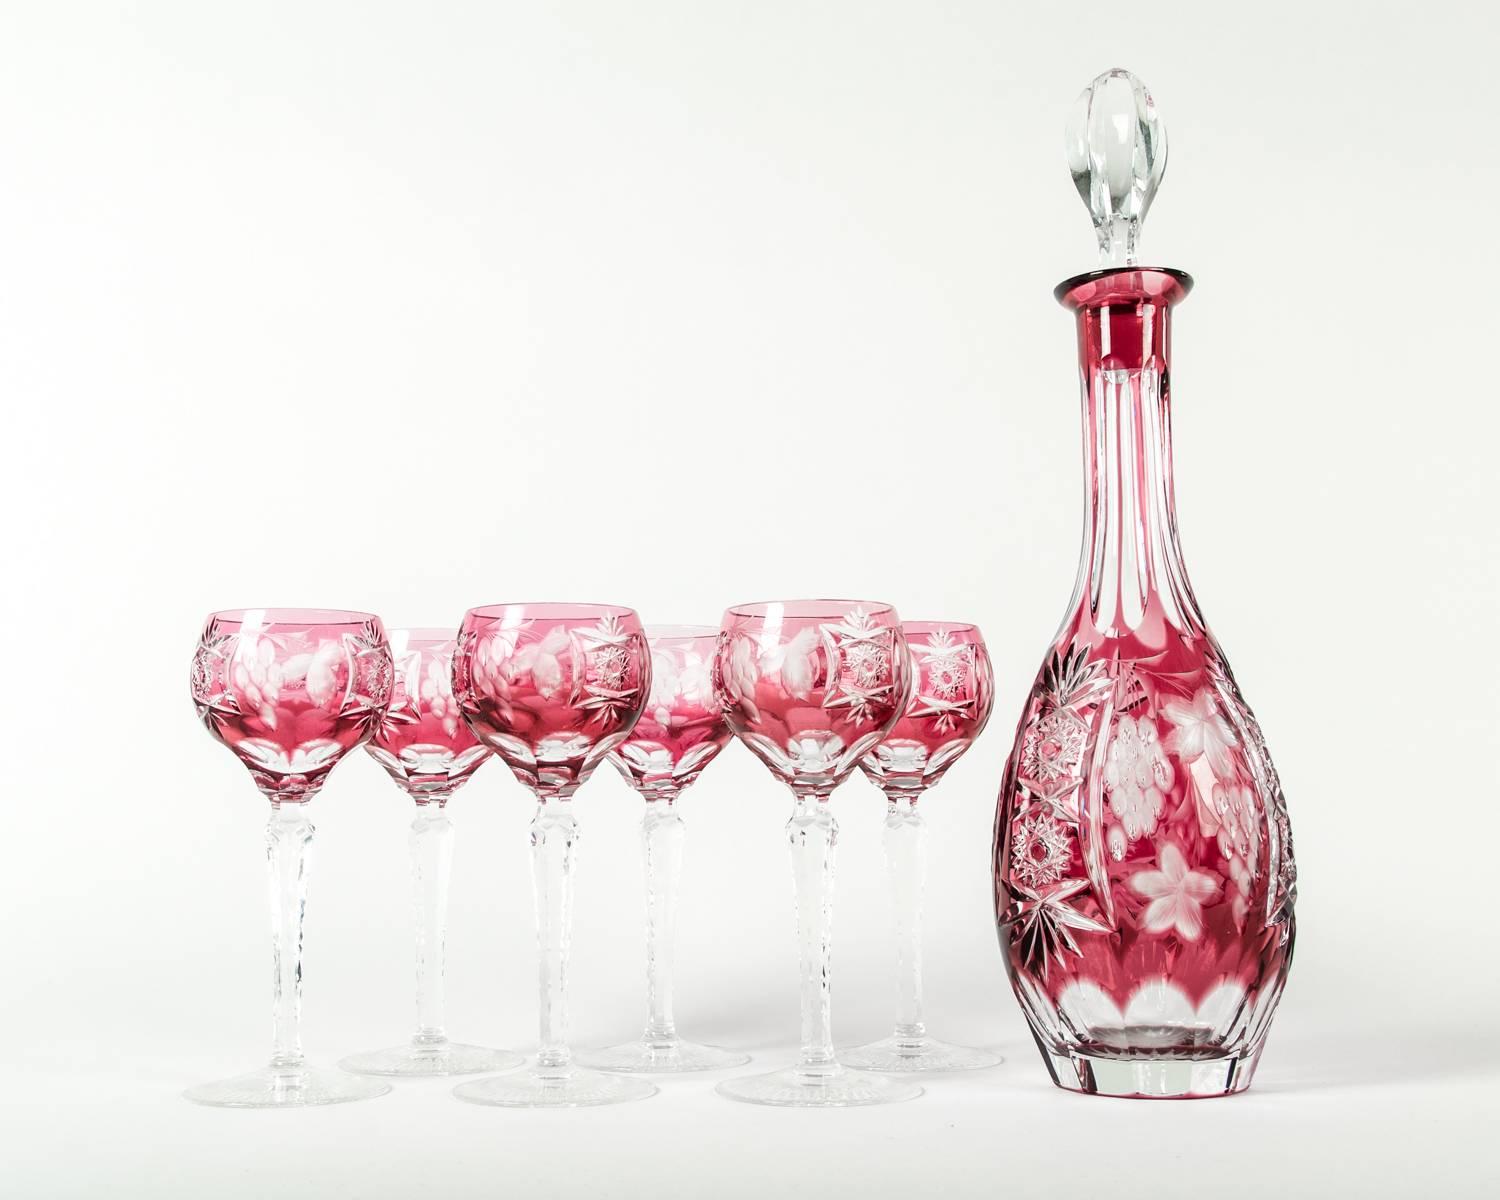 Antique Baccarat cut crystal cranberry wine decanter set. The set include six wine glasses and decanter. Excellent condition. Each glass measure 8 inches high x 3 inches diameter. The decanter measure 12 inches high x 3 inches diameter.